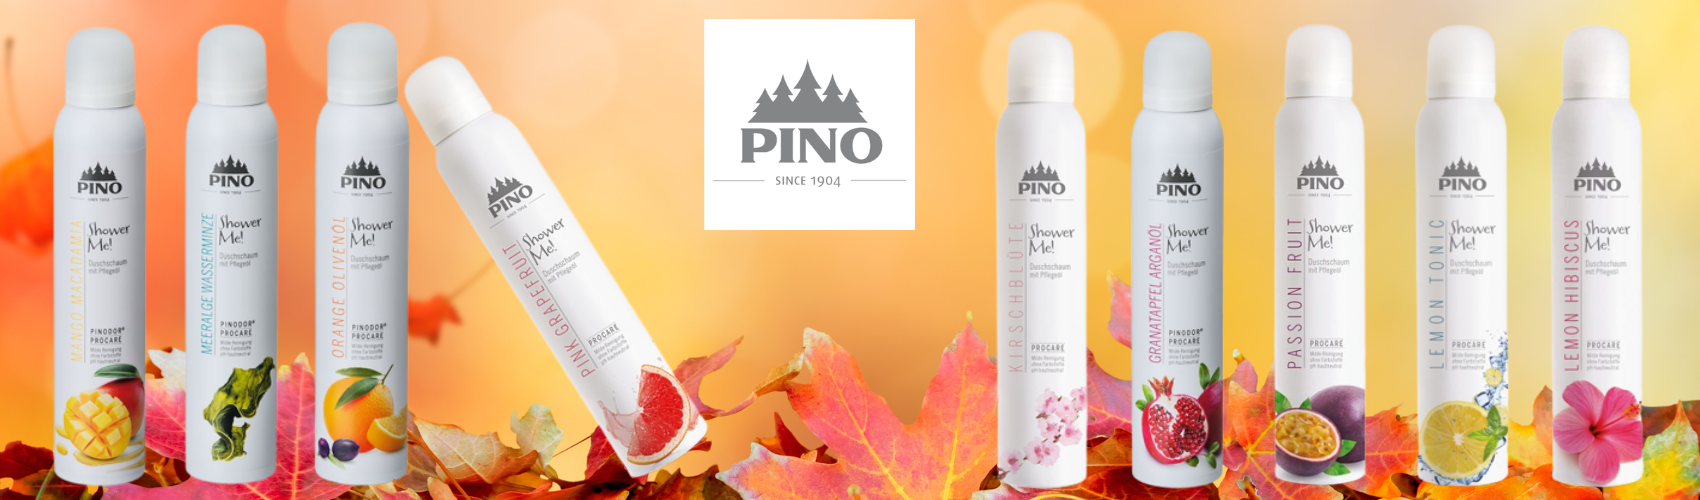 Pino Shower Me Herbst 2022